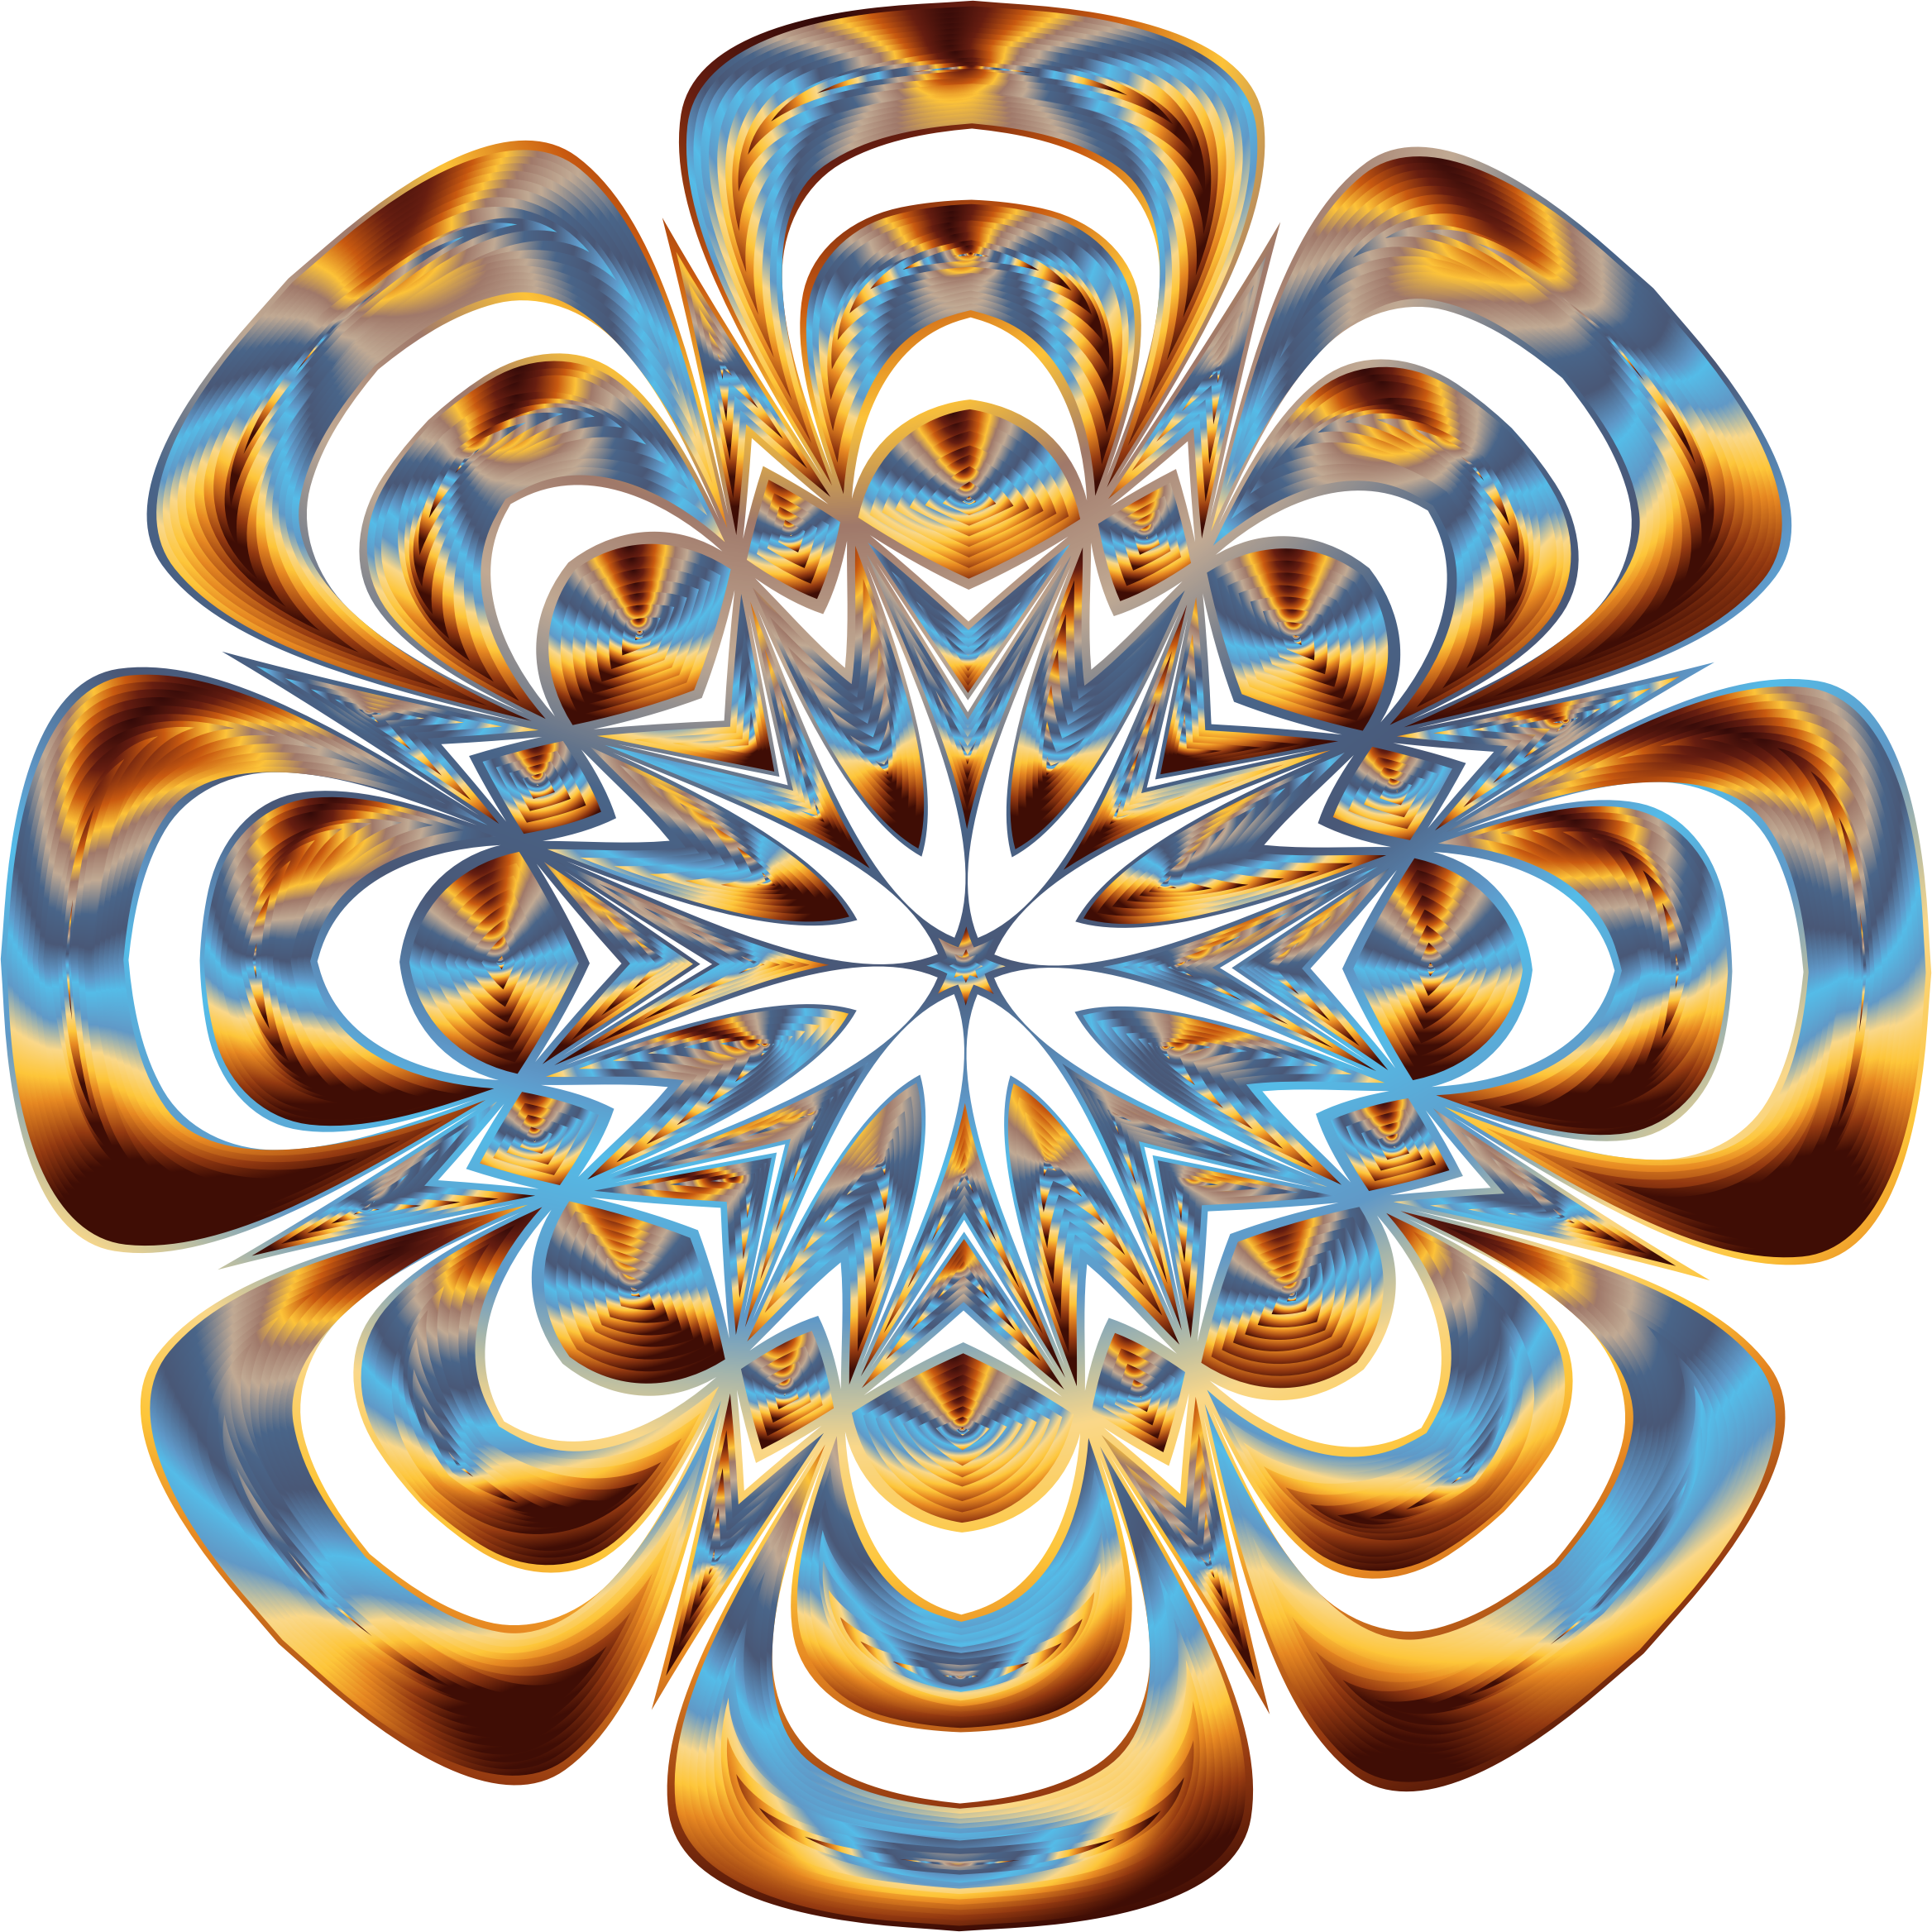 Psychedelic Art Picture - Ode To Joy (2336x2336)